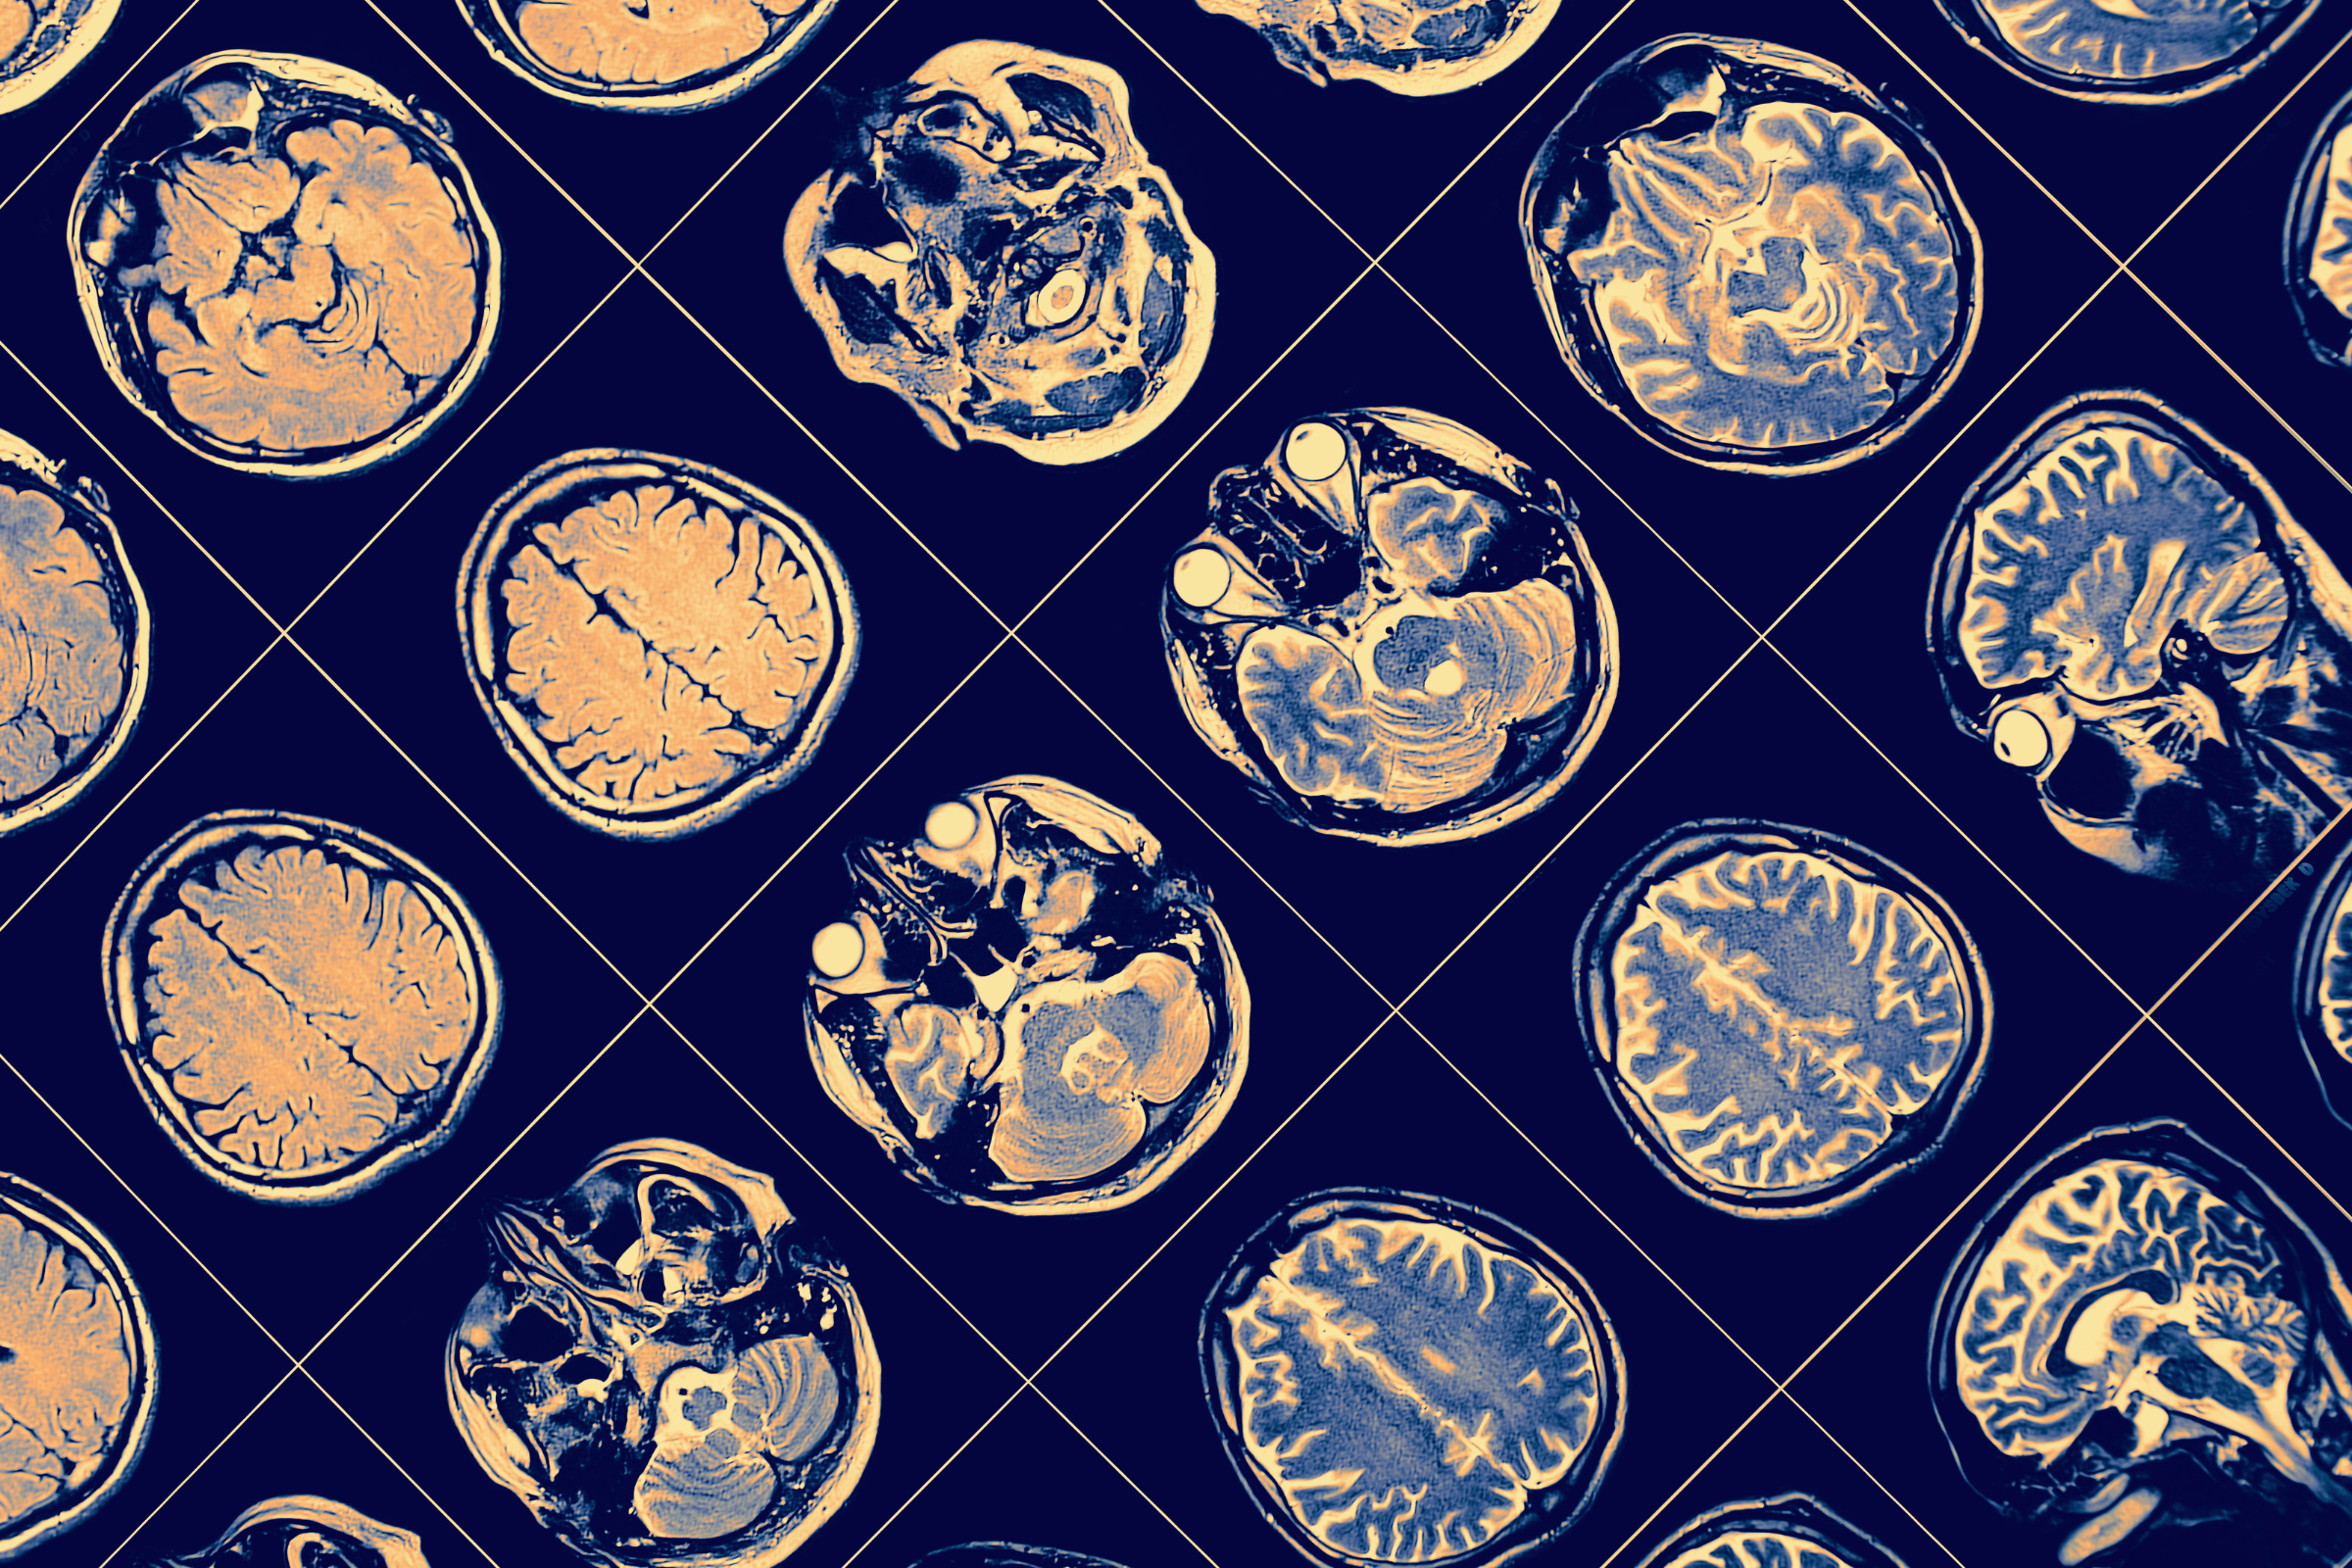 CIRM approves new plan to invest 0 million into basic research in neuropsychiatric diseases